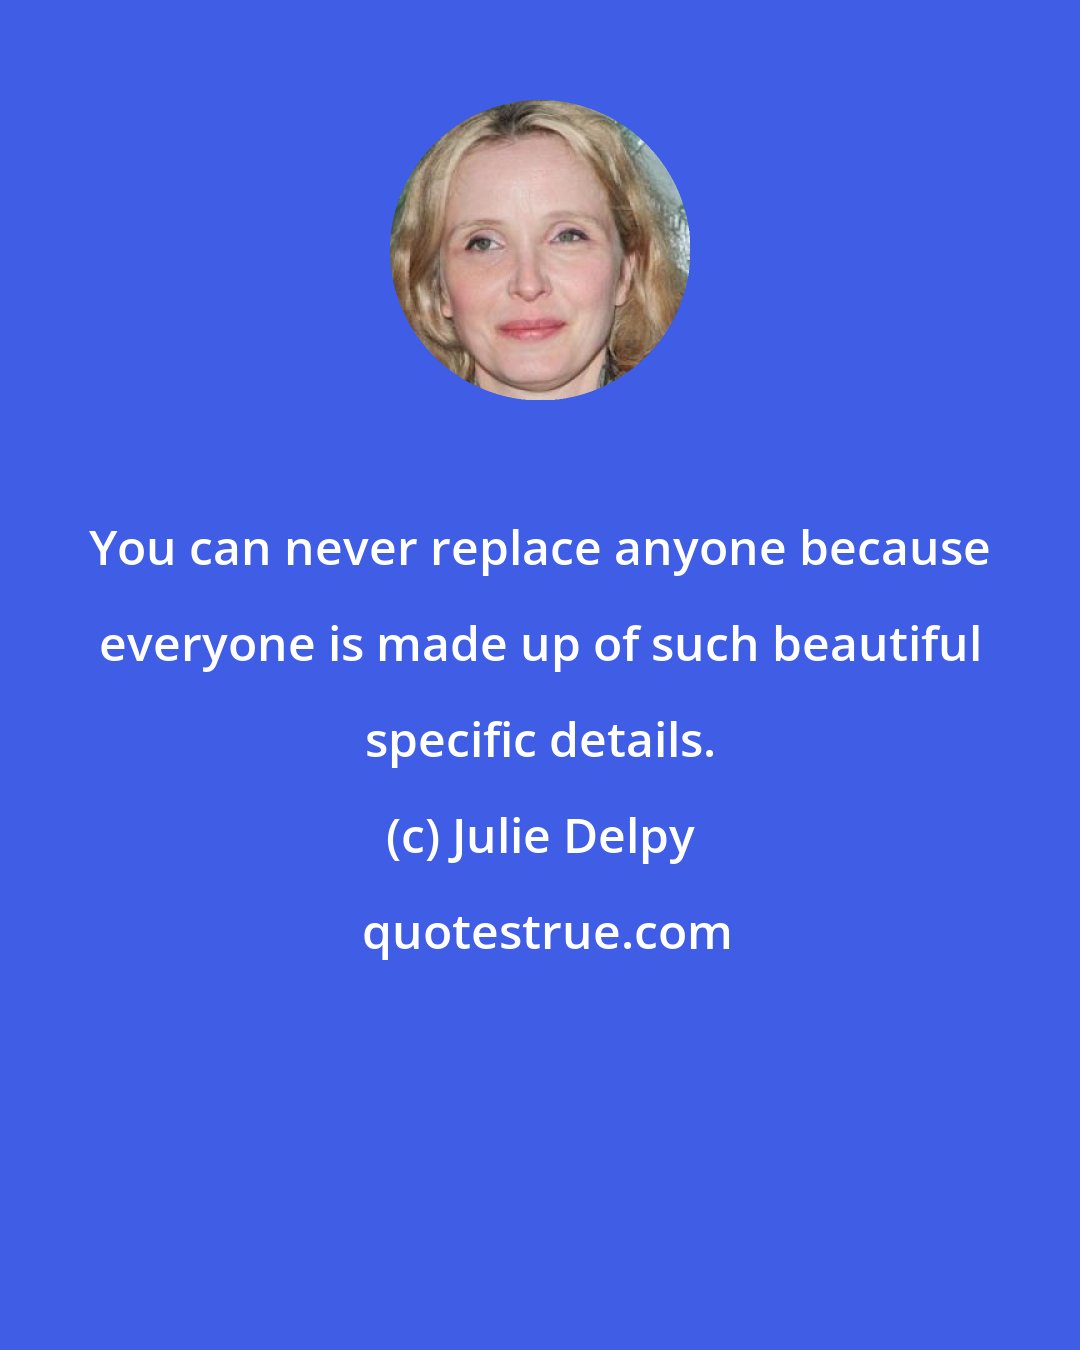 Julie Delpy: You can never replace anyone because everyone is made up of such beautiful specific details.